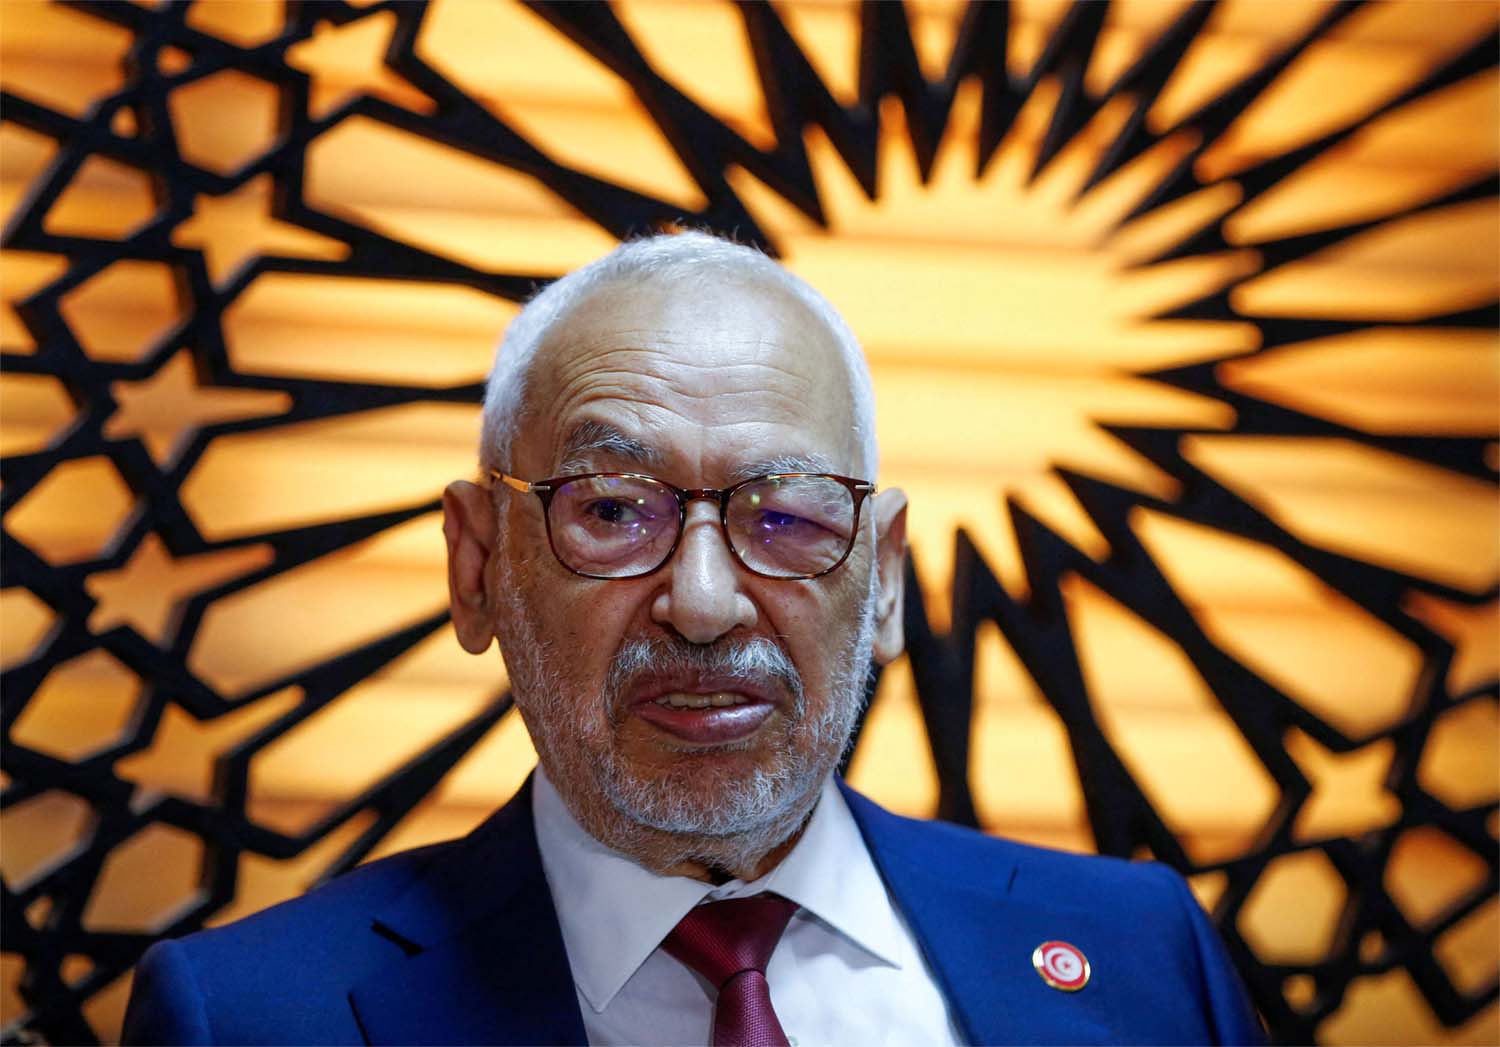 A Tunisian judge sentenced Ghannouchi in absentia last May to a year in prison on charges of incitement